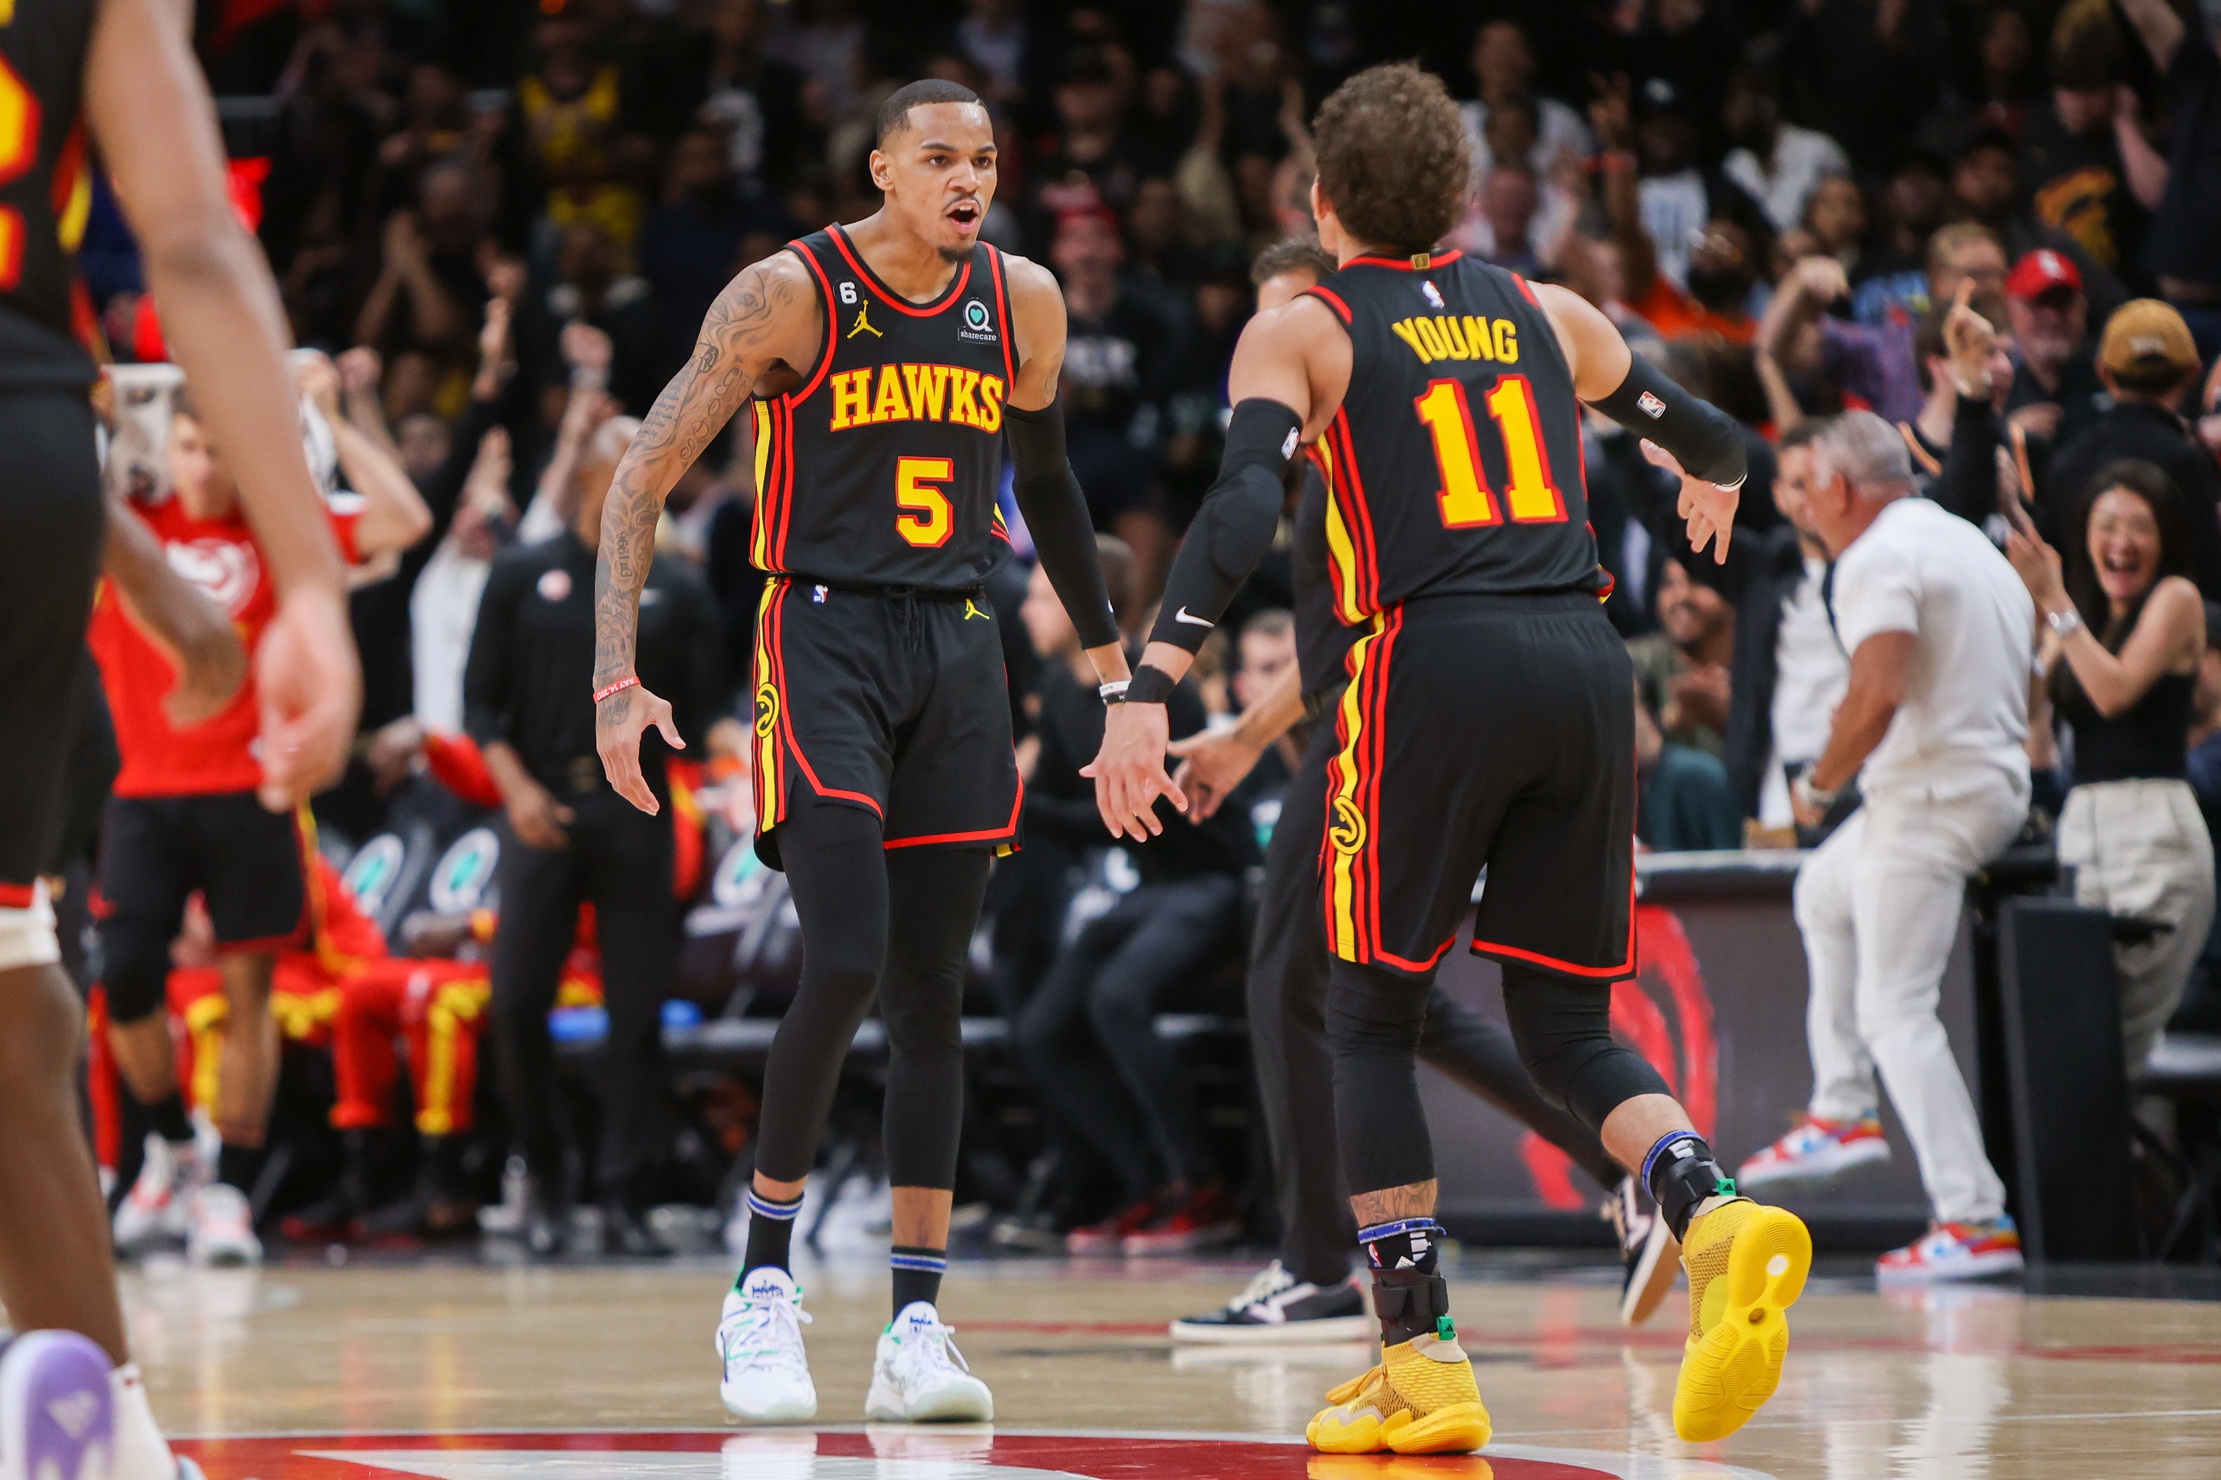 Mar 28, 2023; Atlanta, Georgia, USA; Atlanta Hawks guard Dejounte Murray (5) reacts with guard Trae Young (11) after a basket against the Cleveland Cavaliers in the second half at State Farm Arena. Mandatory Credit: Brett Davis-USA TODAY Sports